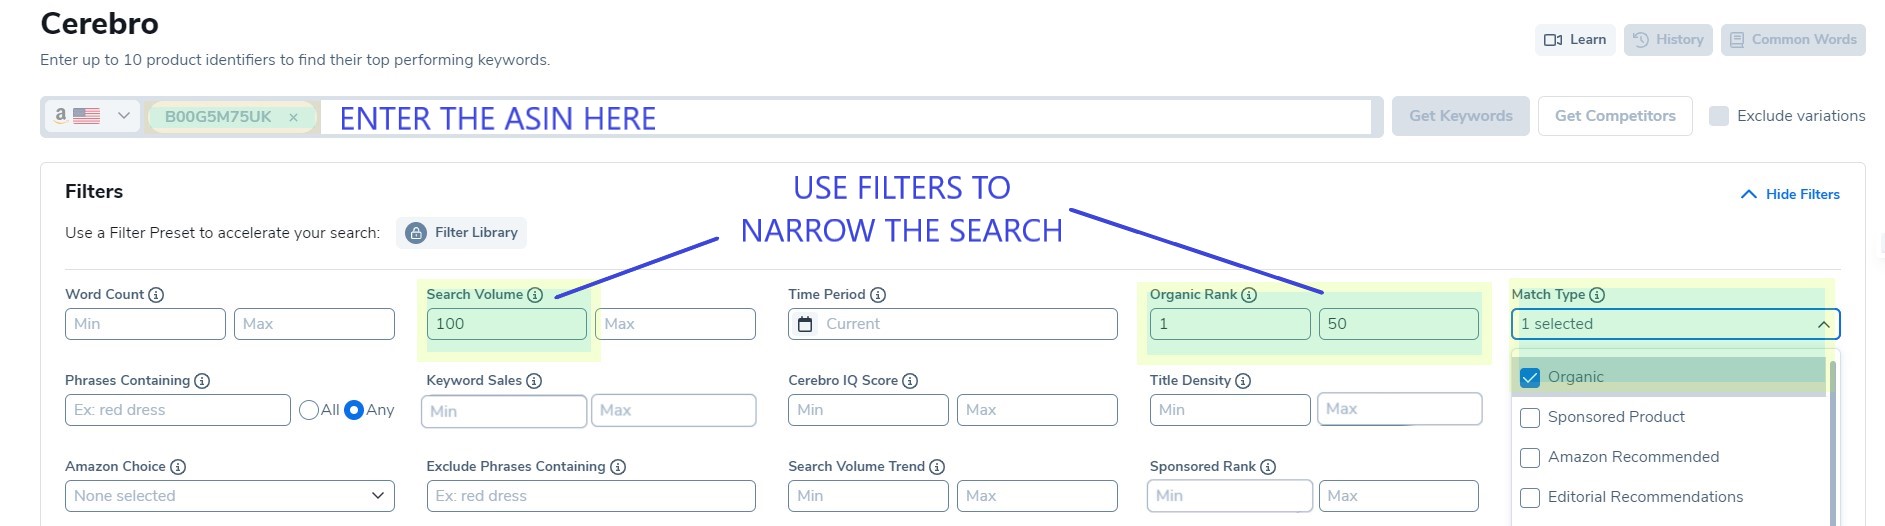 search optimization on amazon example using filters